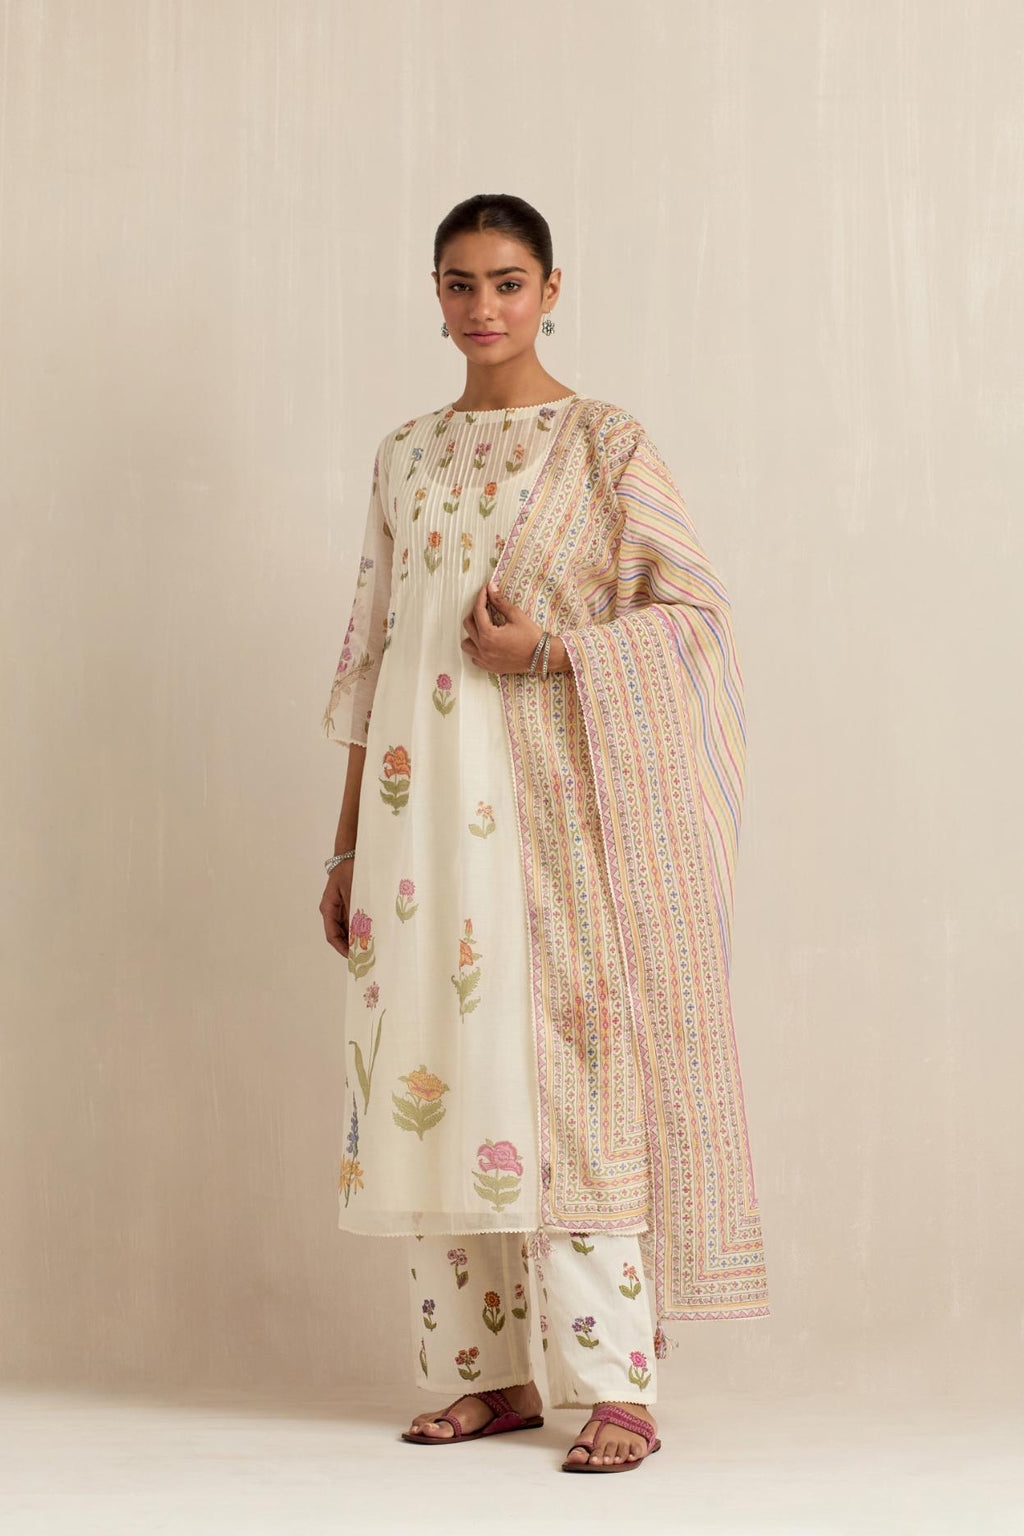 Off white cotton chanderi hand block printed kurta set with pin tucks at yoke and all-over multi colored flower.